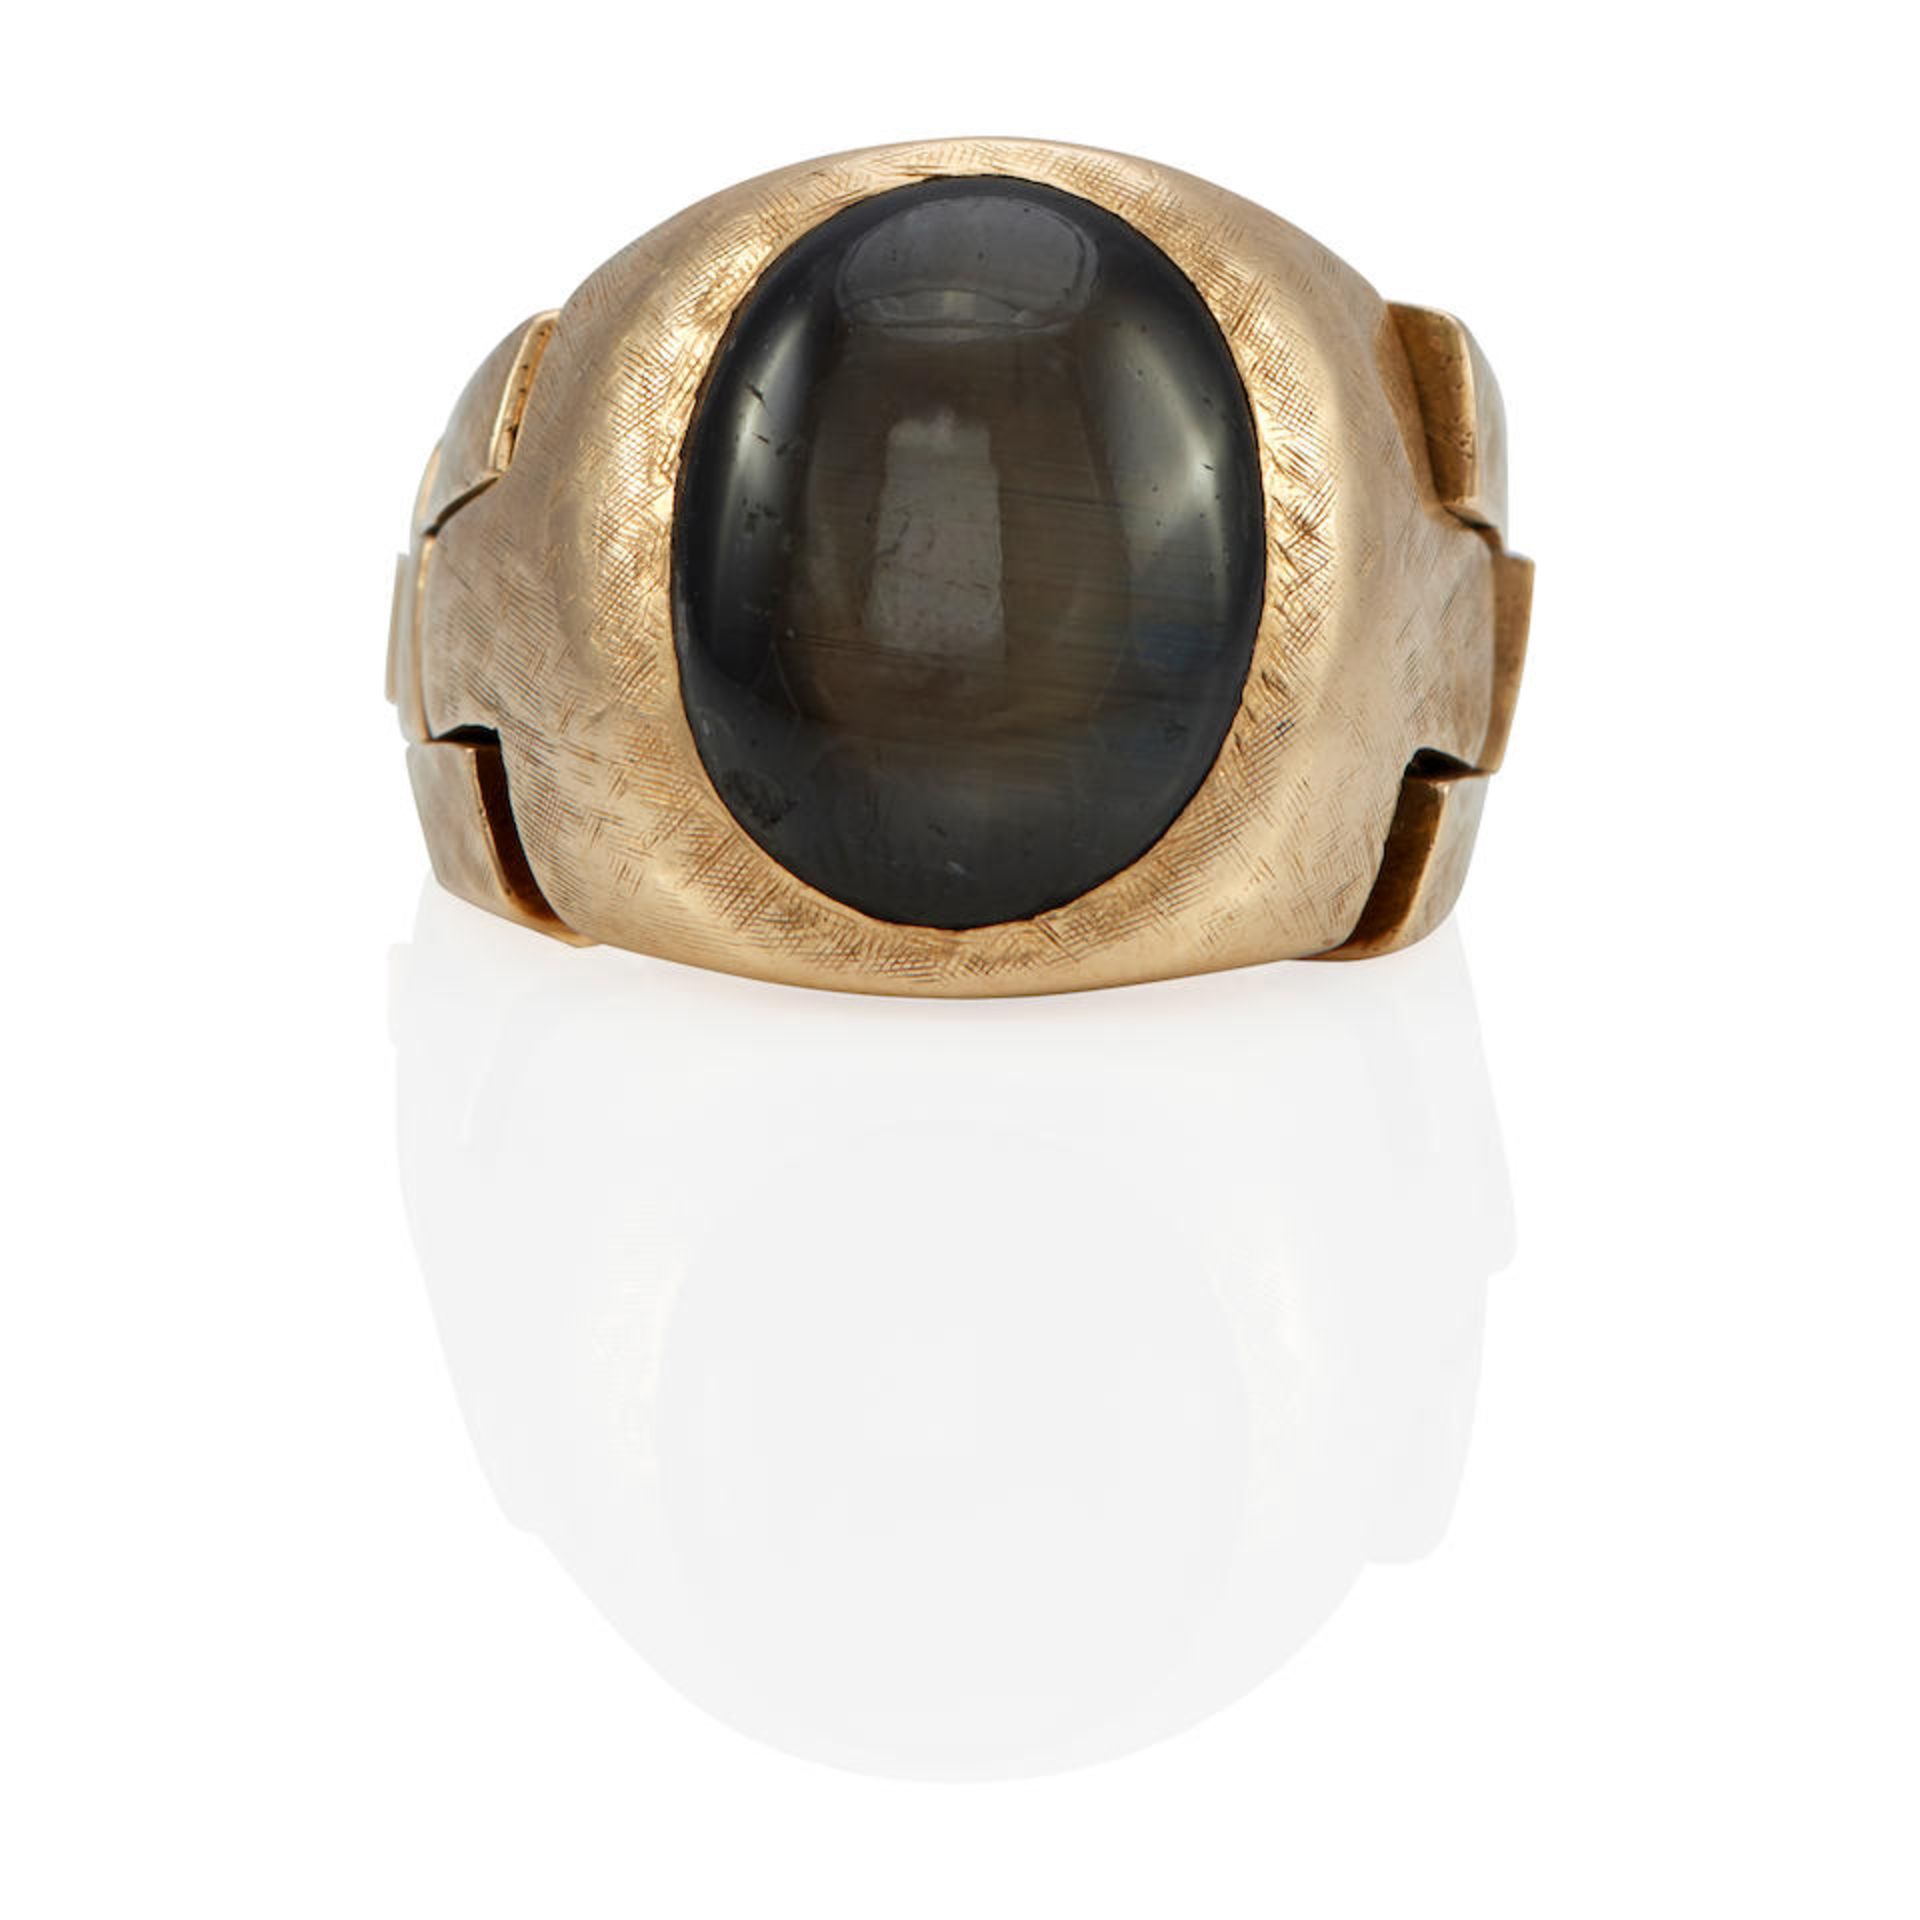 A 14K GOLD AND BLACK STAR SAPPHIRE RING